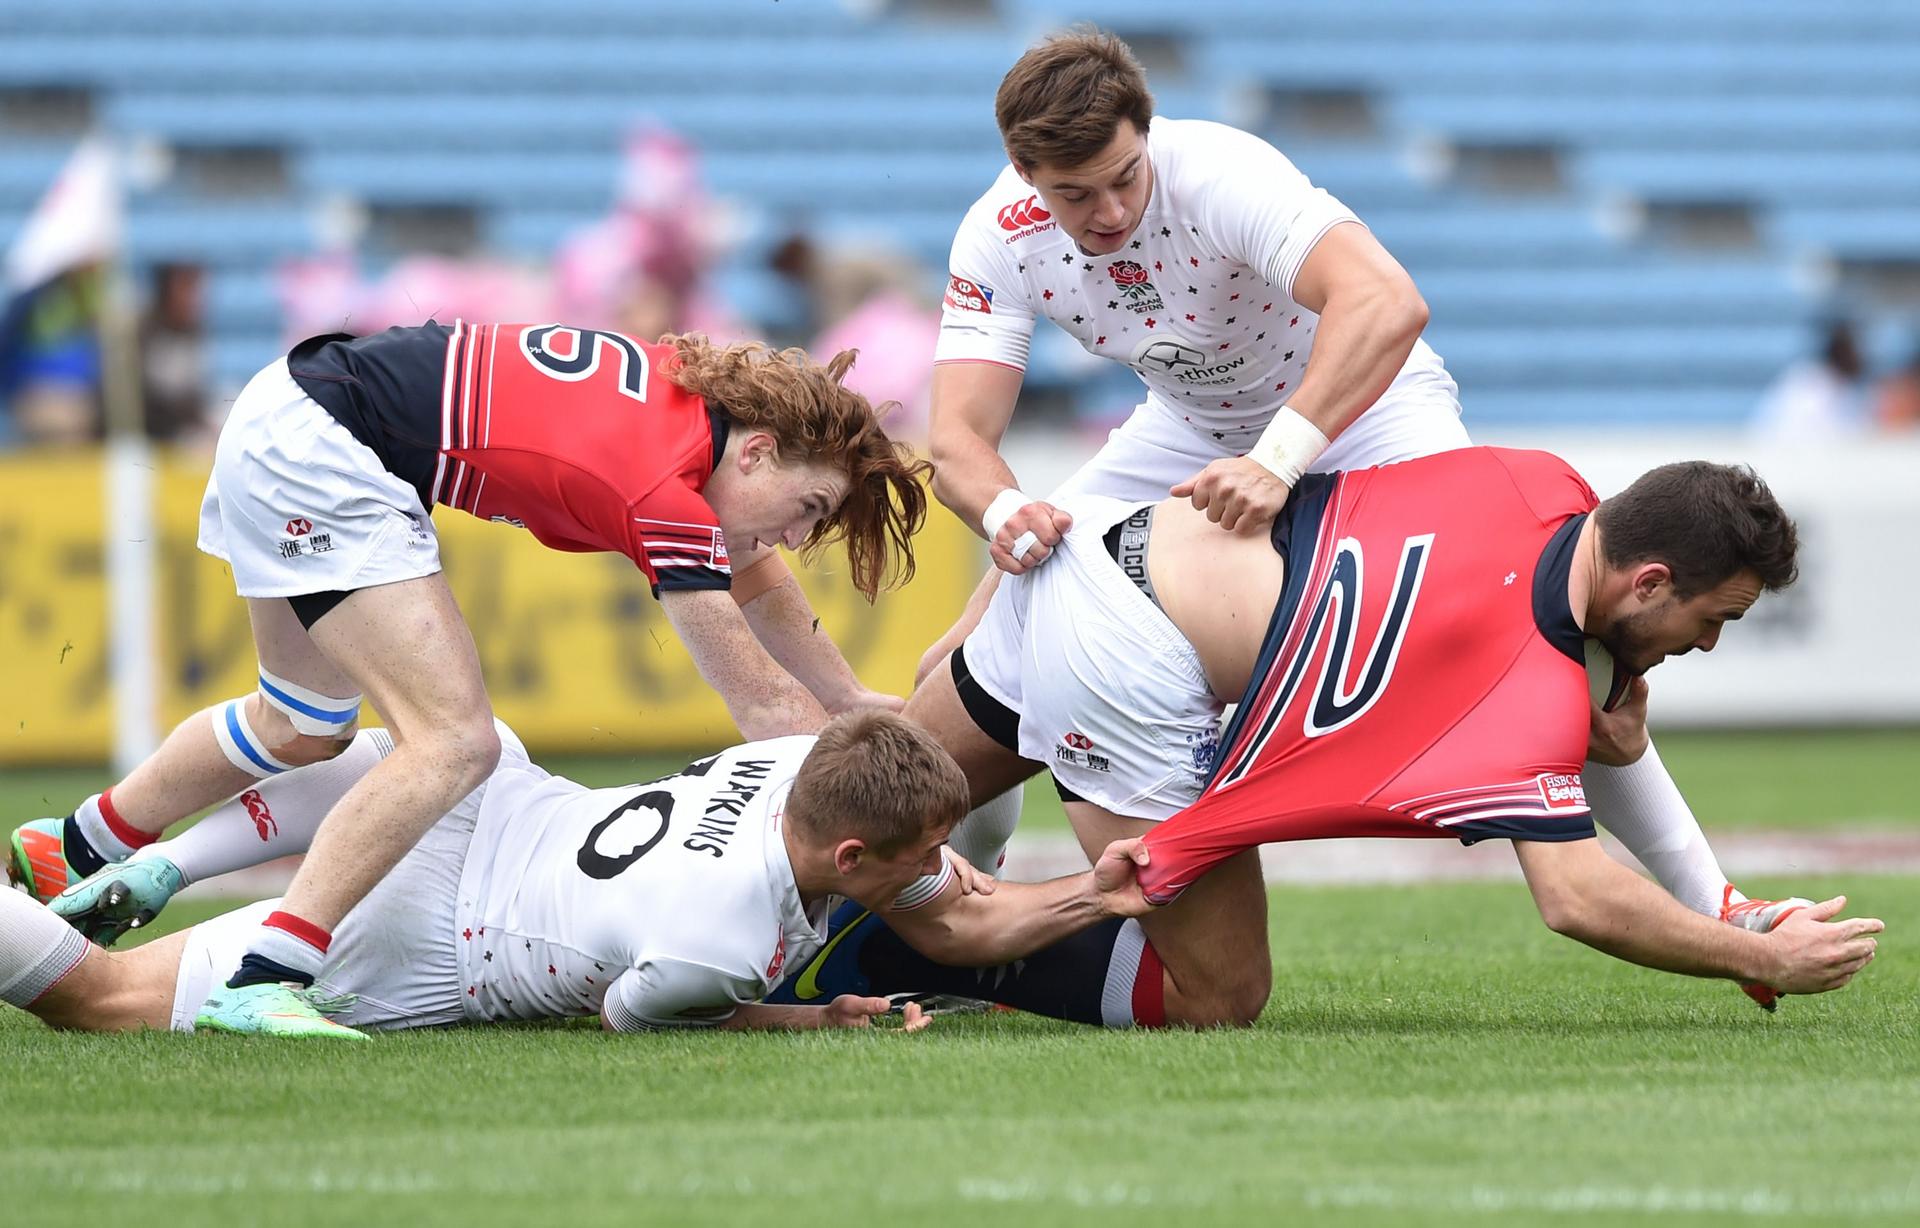 Jack Capon is held up by England's Josh Watkins and Alex Gray, while Hong Kong debutant Hugo Stiles provides support at the Japan Sevens. Photos: AFP